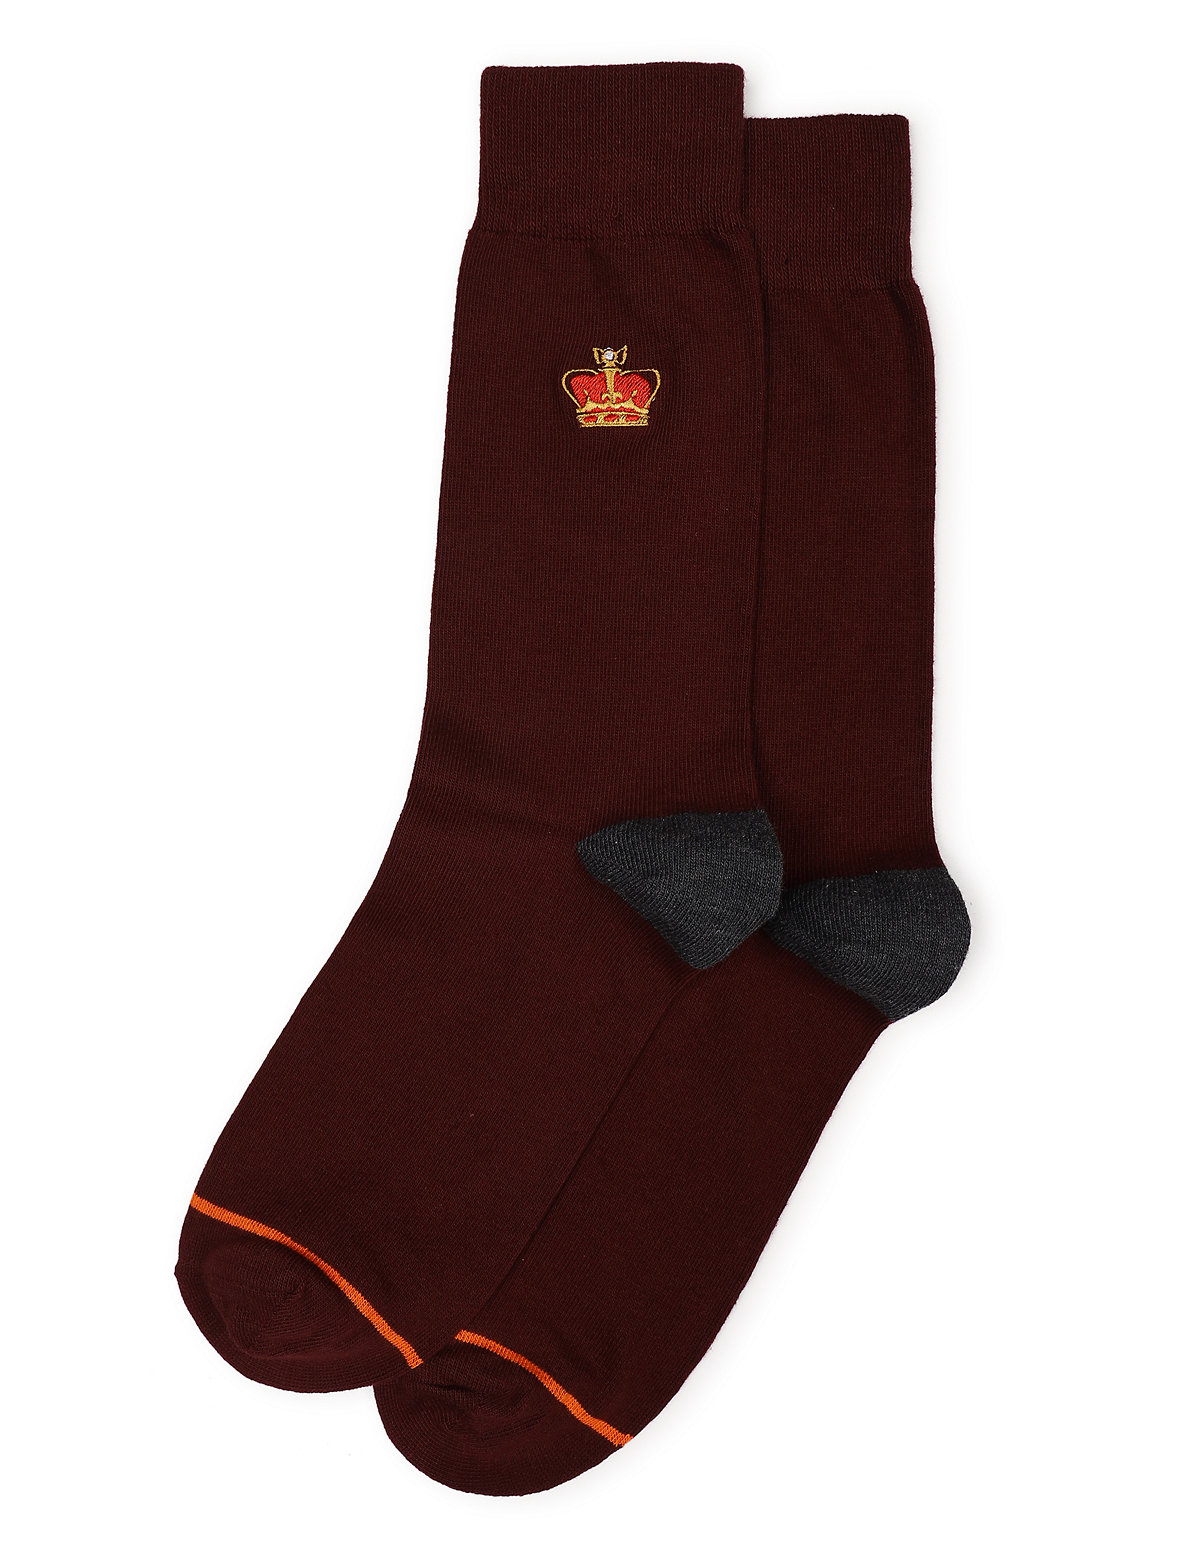 Cotton Mix Embroidered Socks